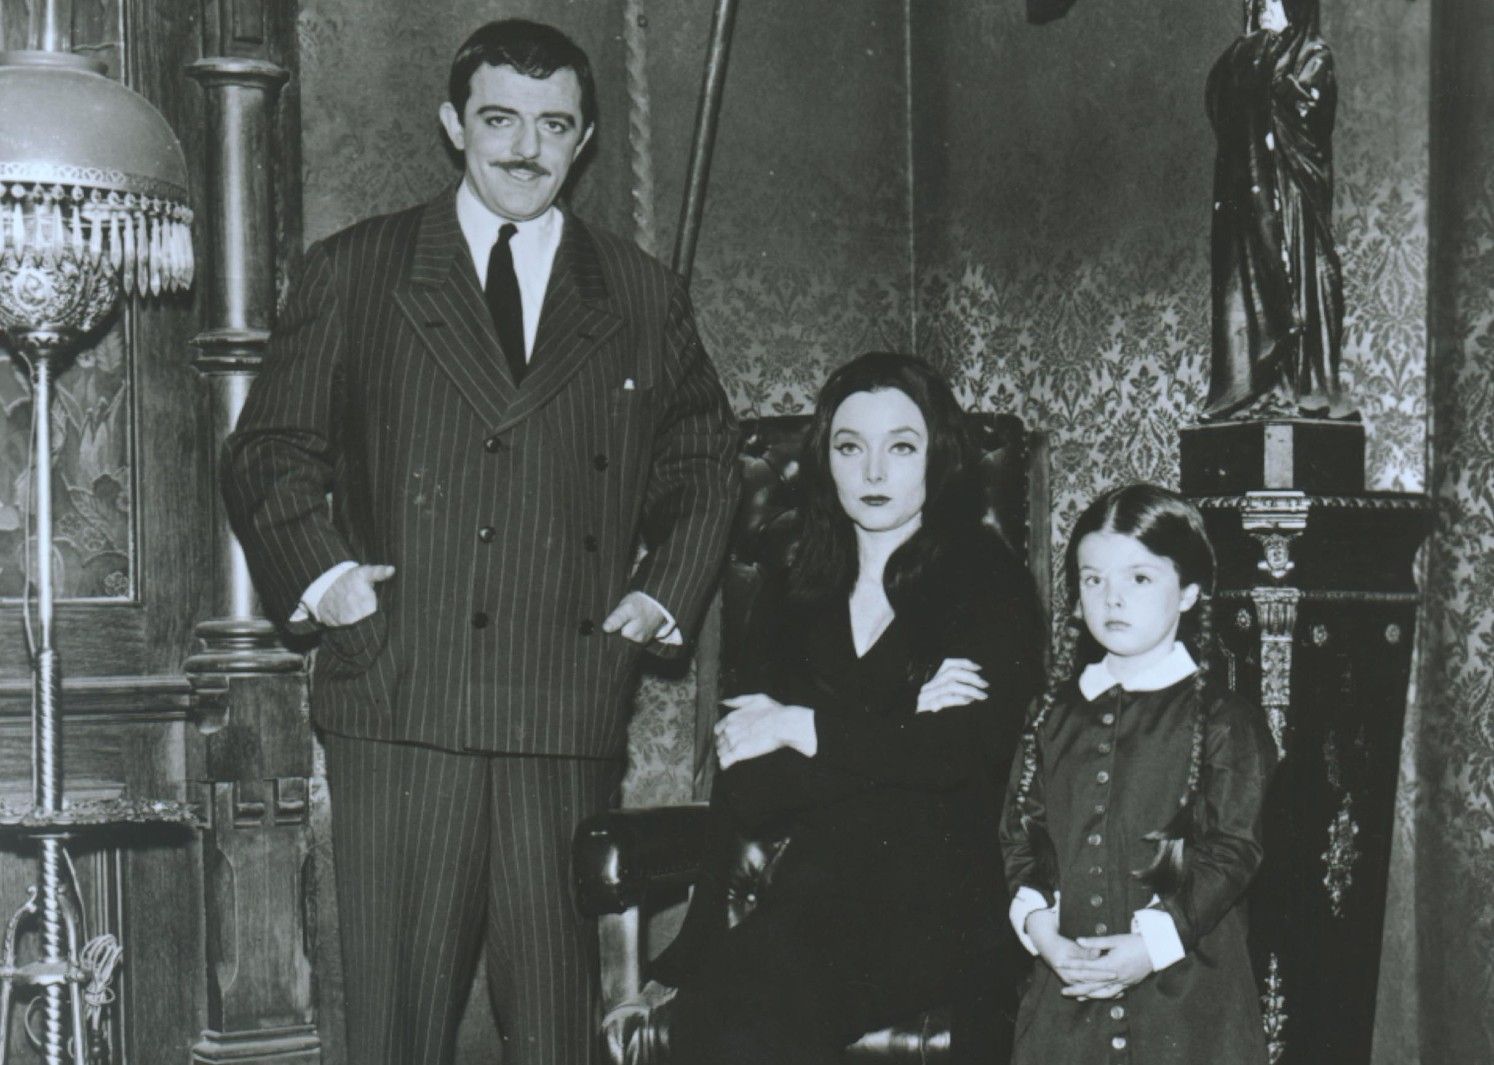 Lisa Loring in The Addams Family